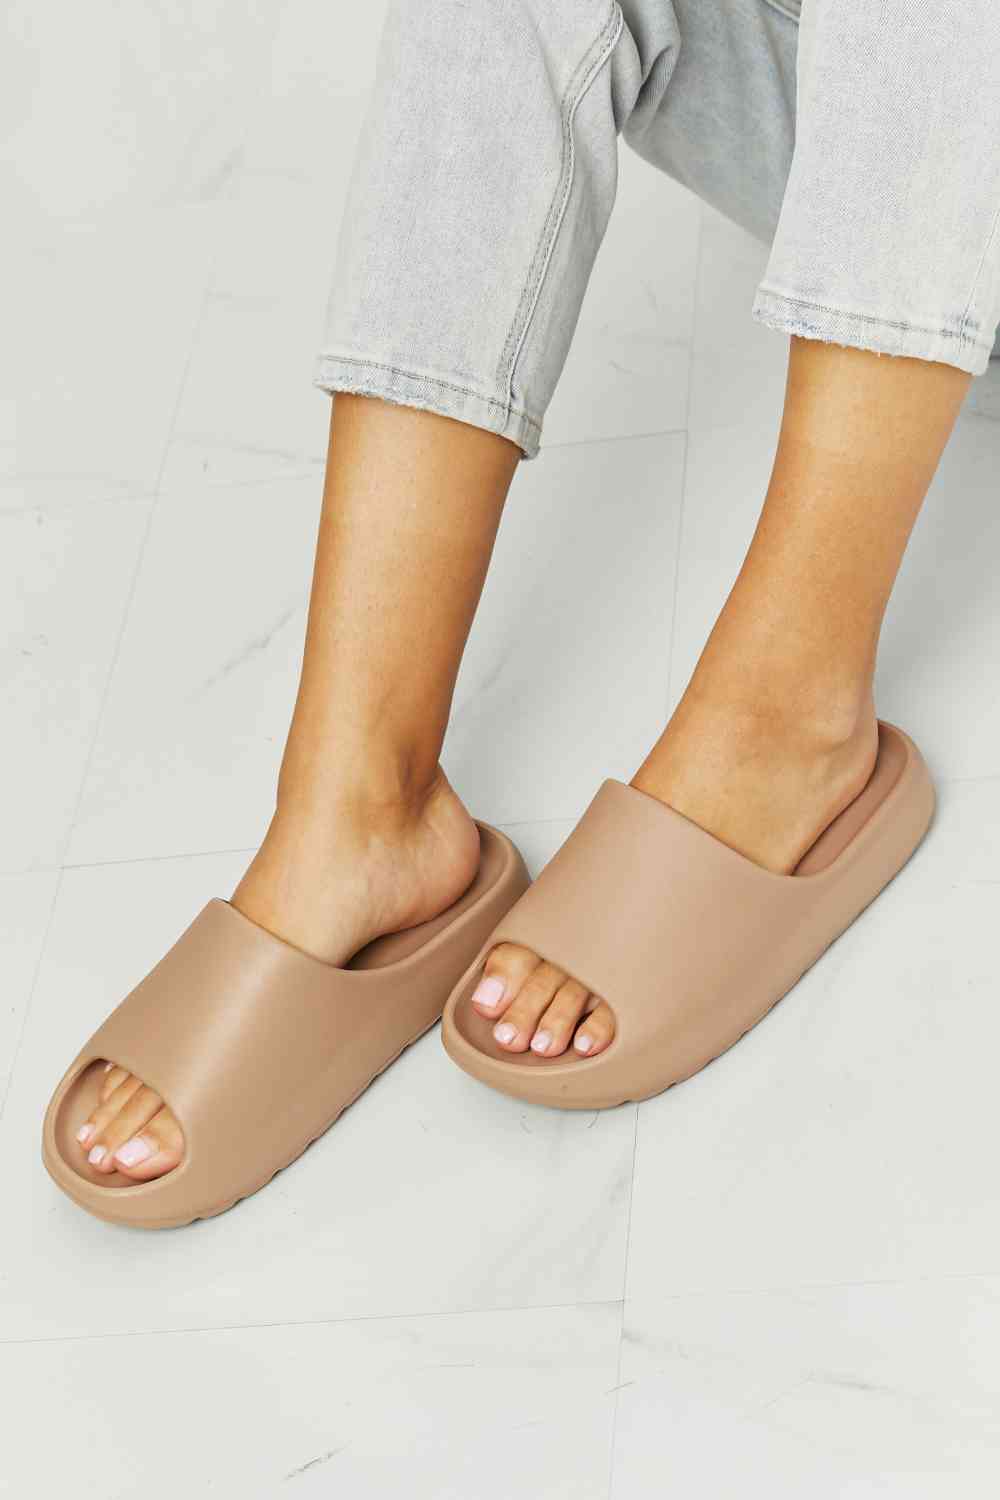 Light Gray NOOK JOI In My Comfort Zone Slides in Beige Sentient Beauty Fashions Shoes